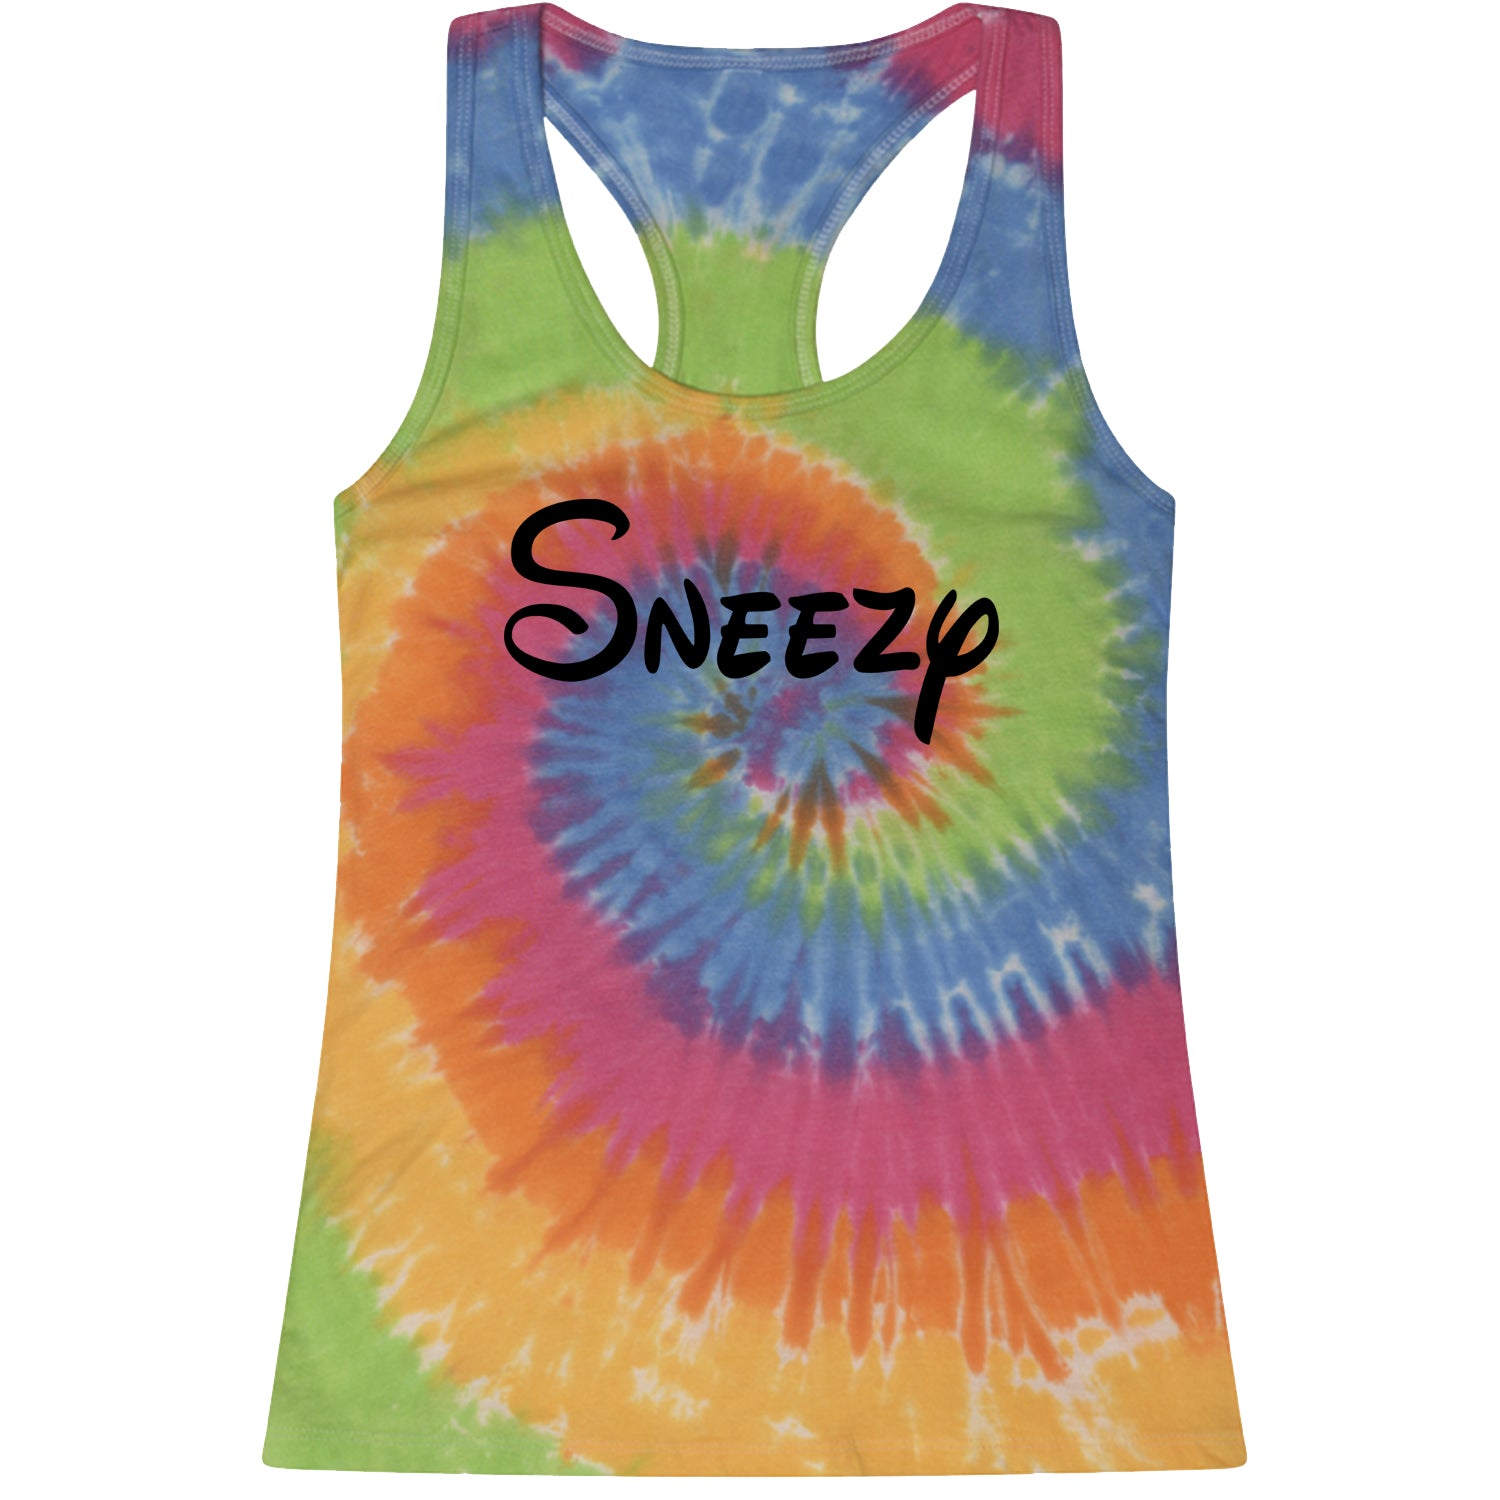 Sneezy - 7 Dwarfs Costume Racerback Tank Top for Women and, costume, dwarfs, group, halloween, matching, seven, snow, the, white by Expression Tees